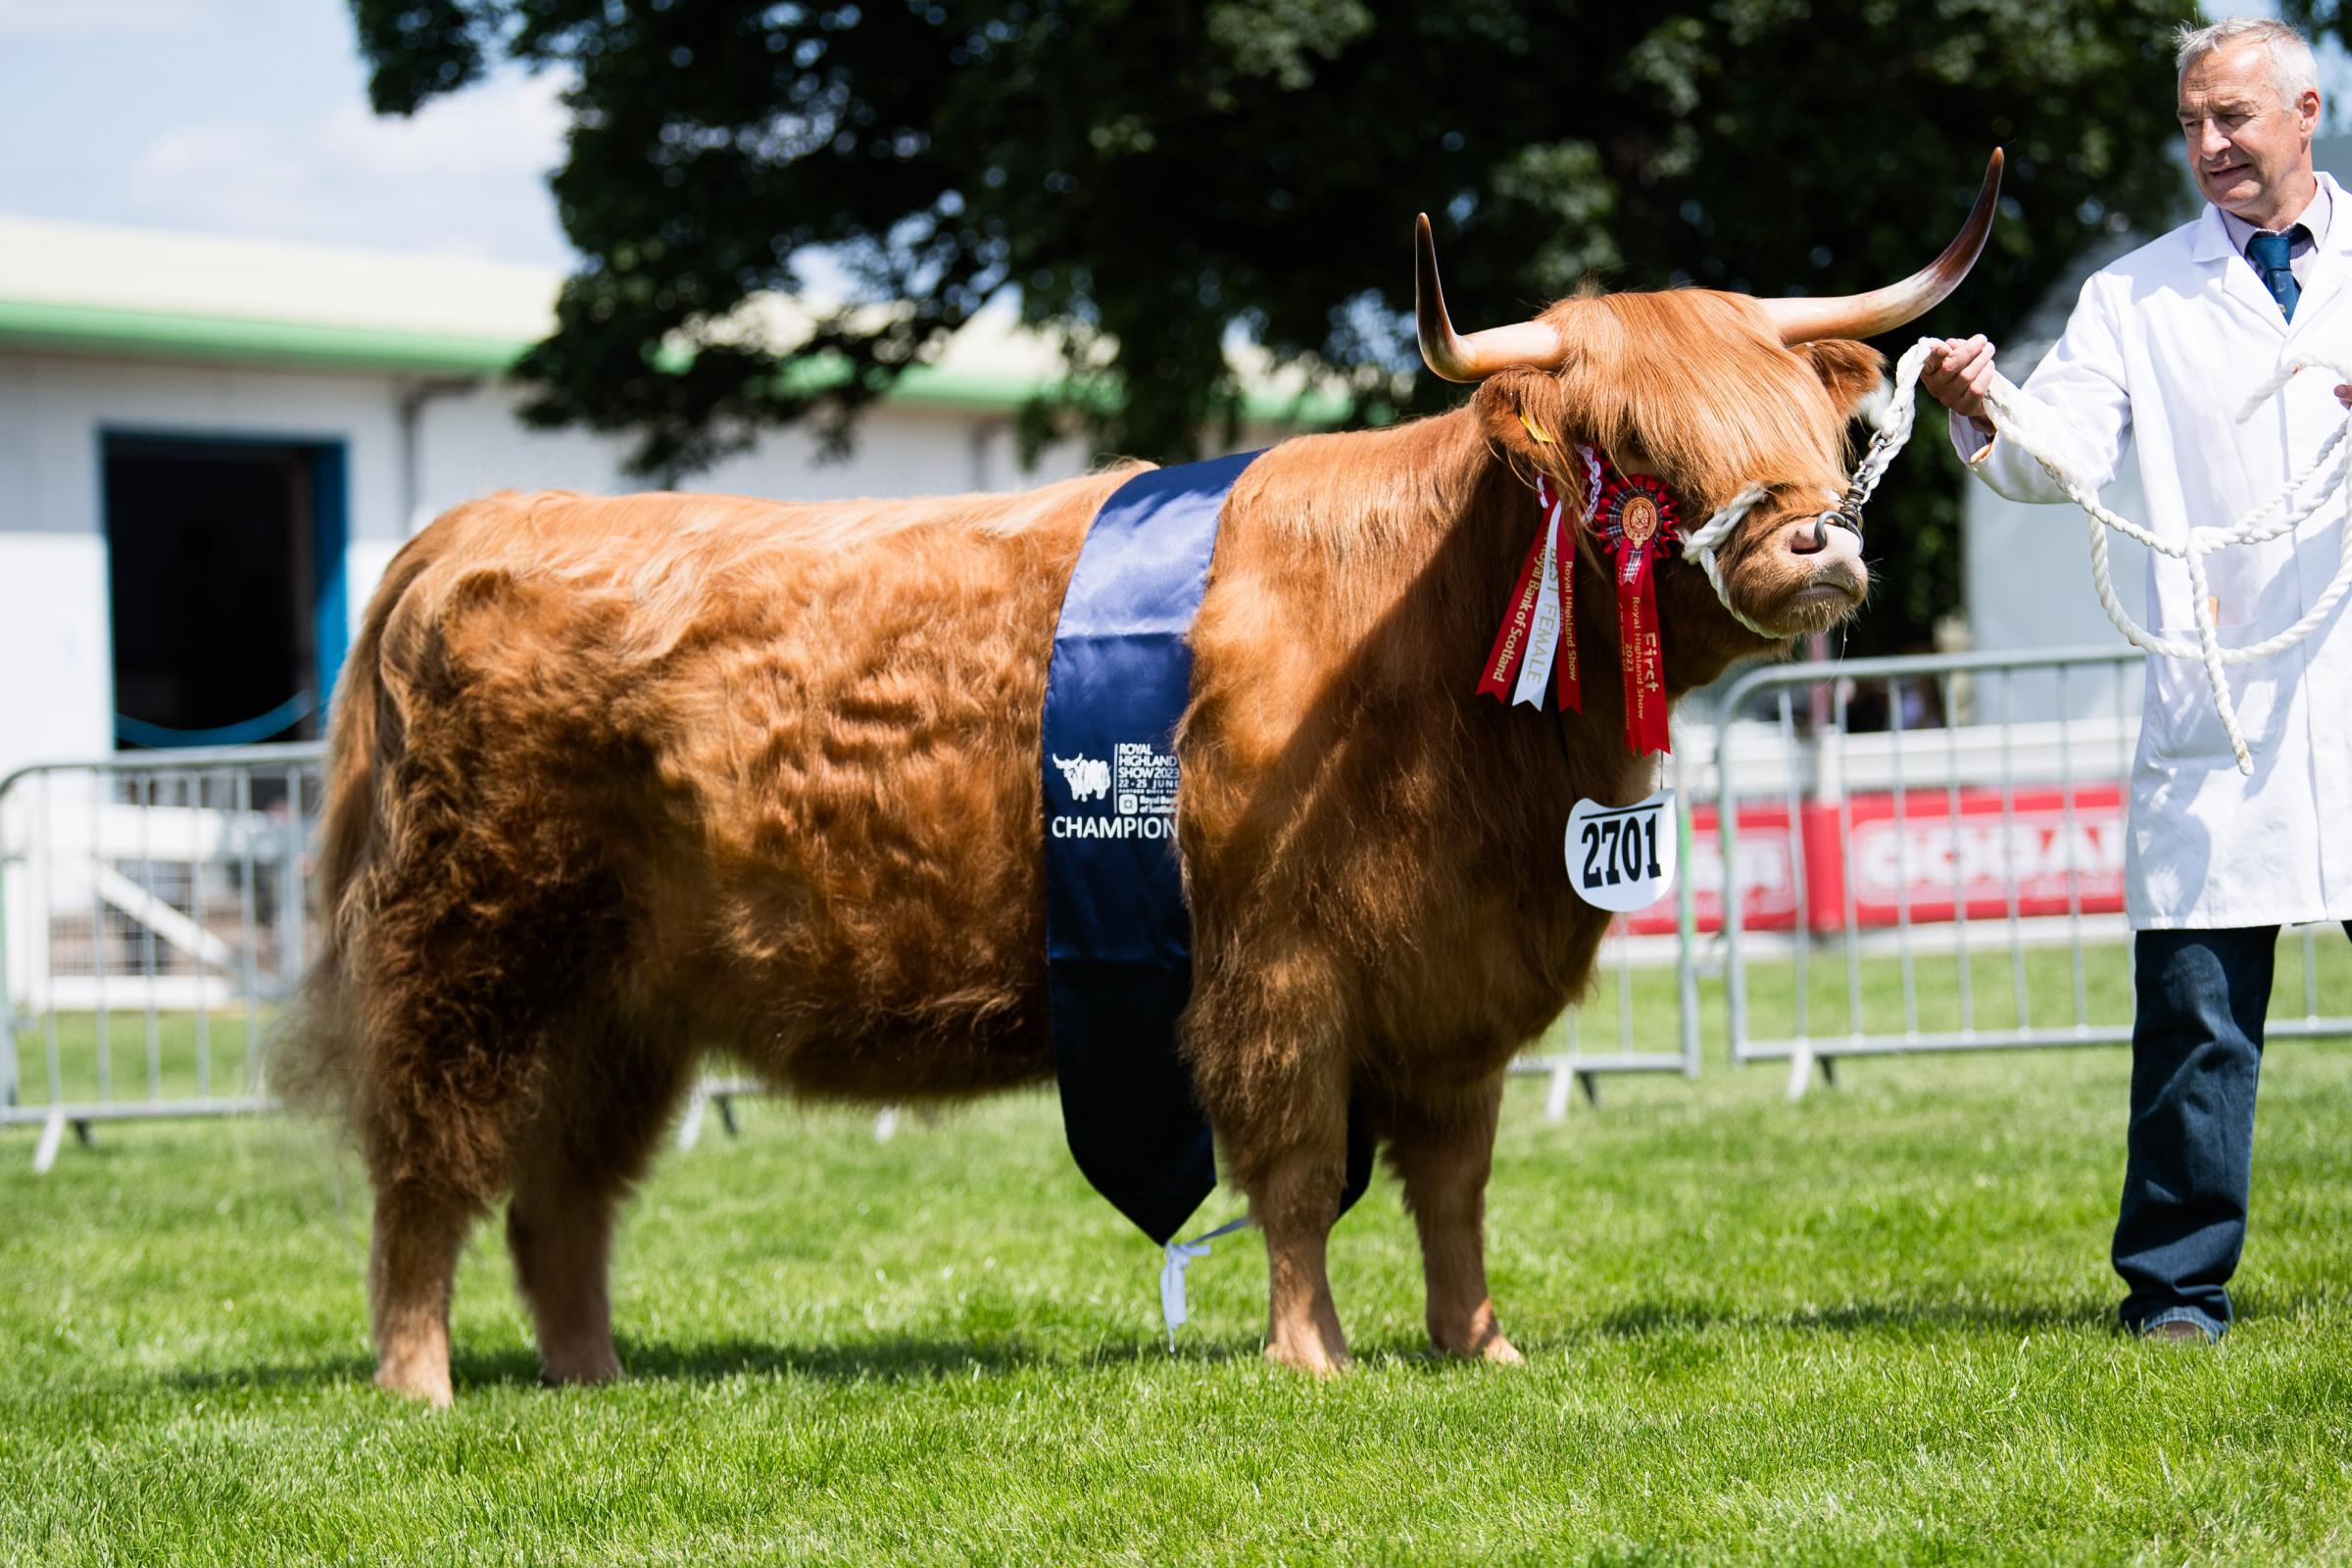 Highland cattle champion from Willie Maclean Ref:RH220623060 Rob Haining / The Scottish Farmer...